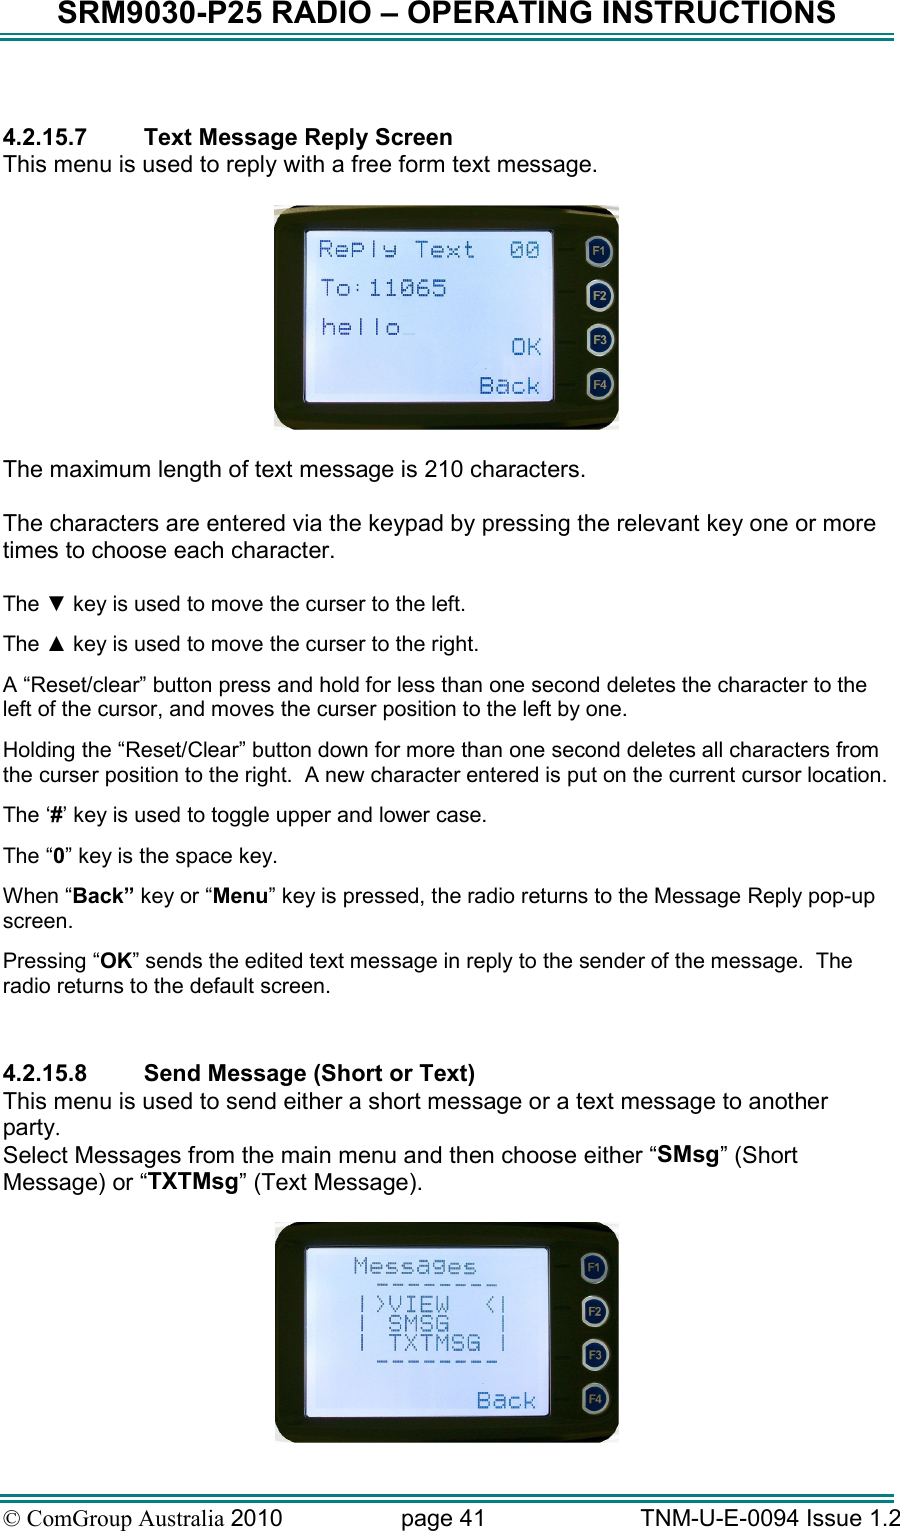 SRM9030-P25 RADIO – OPERATING INSTRUCTIONS © ComGroup Australia 2010  page 41   TNM-U-E-0094 Issue 1.2  4.2.15.7  Text Message Reply Screen This menu is used to reply with a free form text message.    The maximum length of text message is 210 characters.    The characters are entered via the keypad by pressing the relevant key one or more times to choose each character.  The ▼ key is used to move the curser to the left. The ▲ key is used to move the curser to the right. A “Reset/clear” button press and hold for less than one second deletes the character to the left of the cursor, and moves the curser position to the left by one.   Holding the “Reset/Clear” button down for more than one second deletes all characters from the curser position to the right.  A new character entered is put on the current cursor location.   The ‘#’ key is used to toggle upper and lower case. The “0” key is the space key. When “Back” key or “Menu” key is pressed, the radio returns to the Message Reply pop-up screen. Pressing “OK” sends the edited text message in reply to the sender of the message.  The radio returns to the default screen.  4.2.15.8  Send Message (Short or Text) This menu is used to send either a short message or a text message to another party.    Select Messages from the main menu and then choose either “SMsg” (Short Message) or “TXTMsg” (Text Message).   